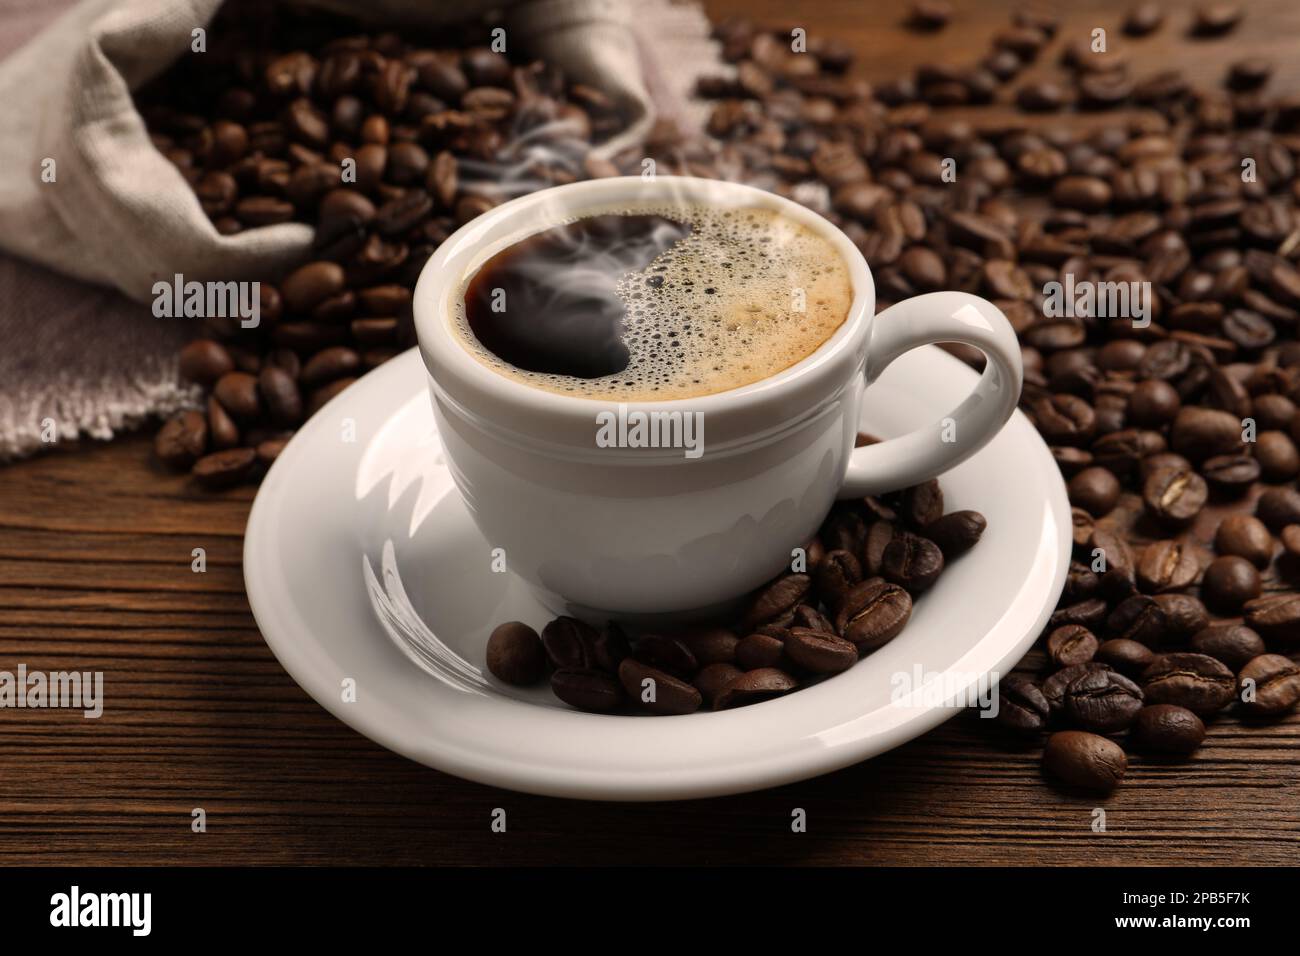 https://c8.alamy.com/comp/2PB5F7K/cup-of-aromatic-hot-coffee-and-beans-on-wooden-table-2PB5F7K.jpg